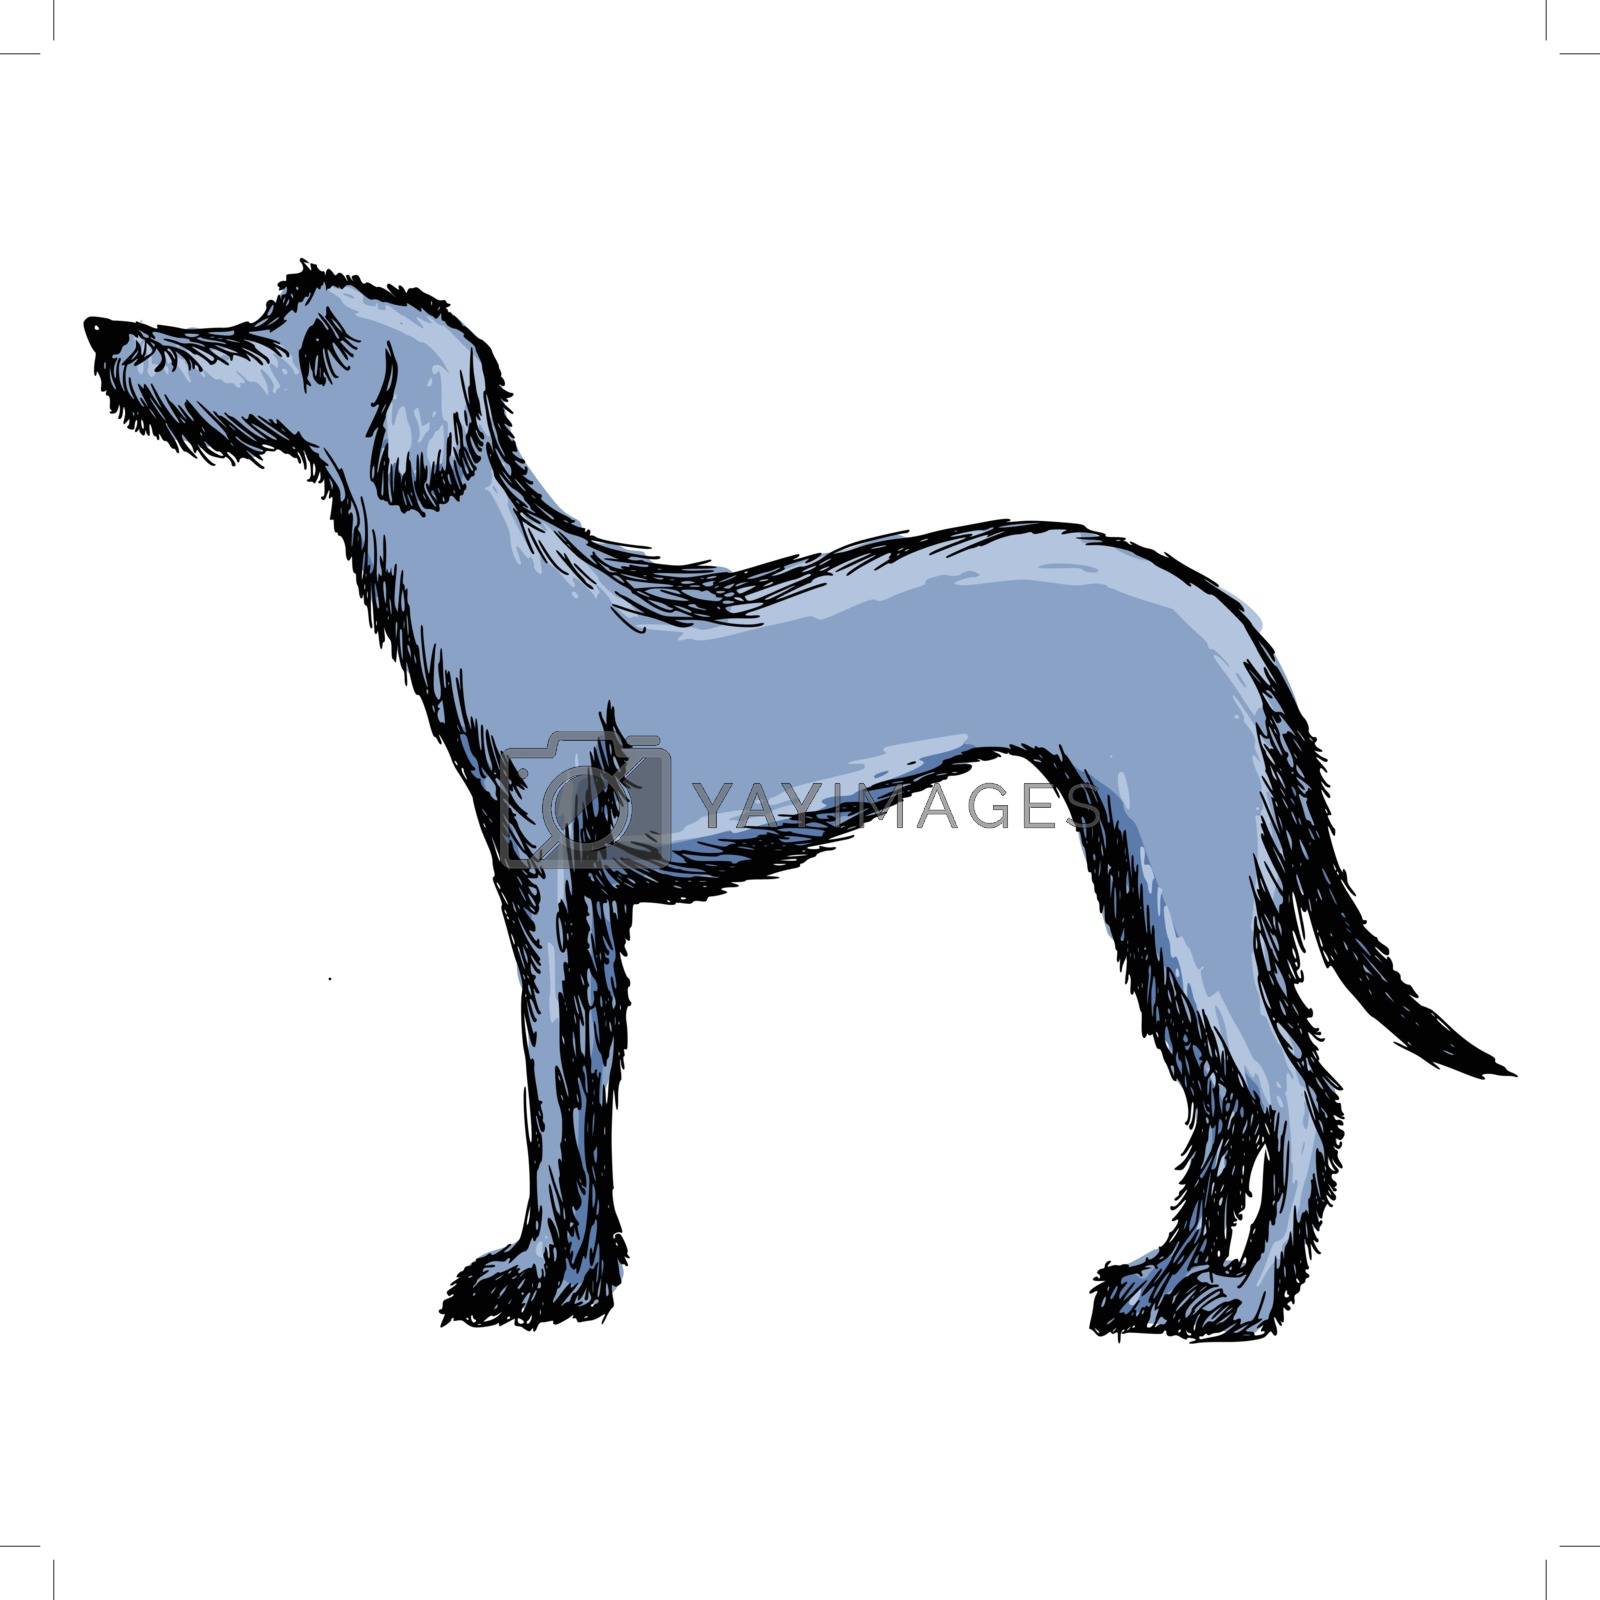 Royalty free image of deerhound by Perysty